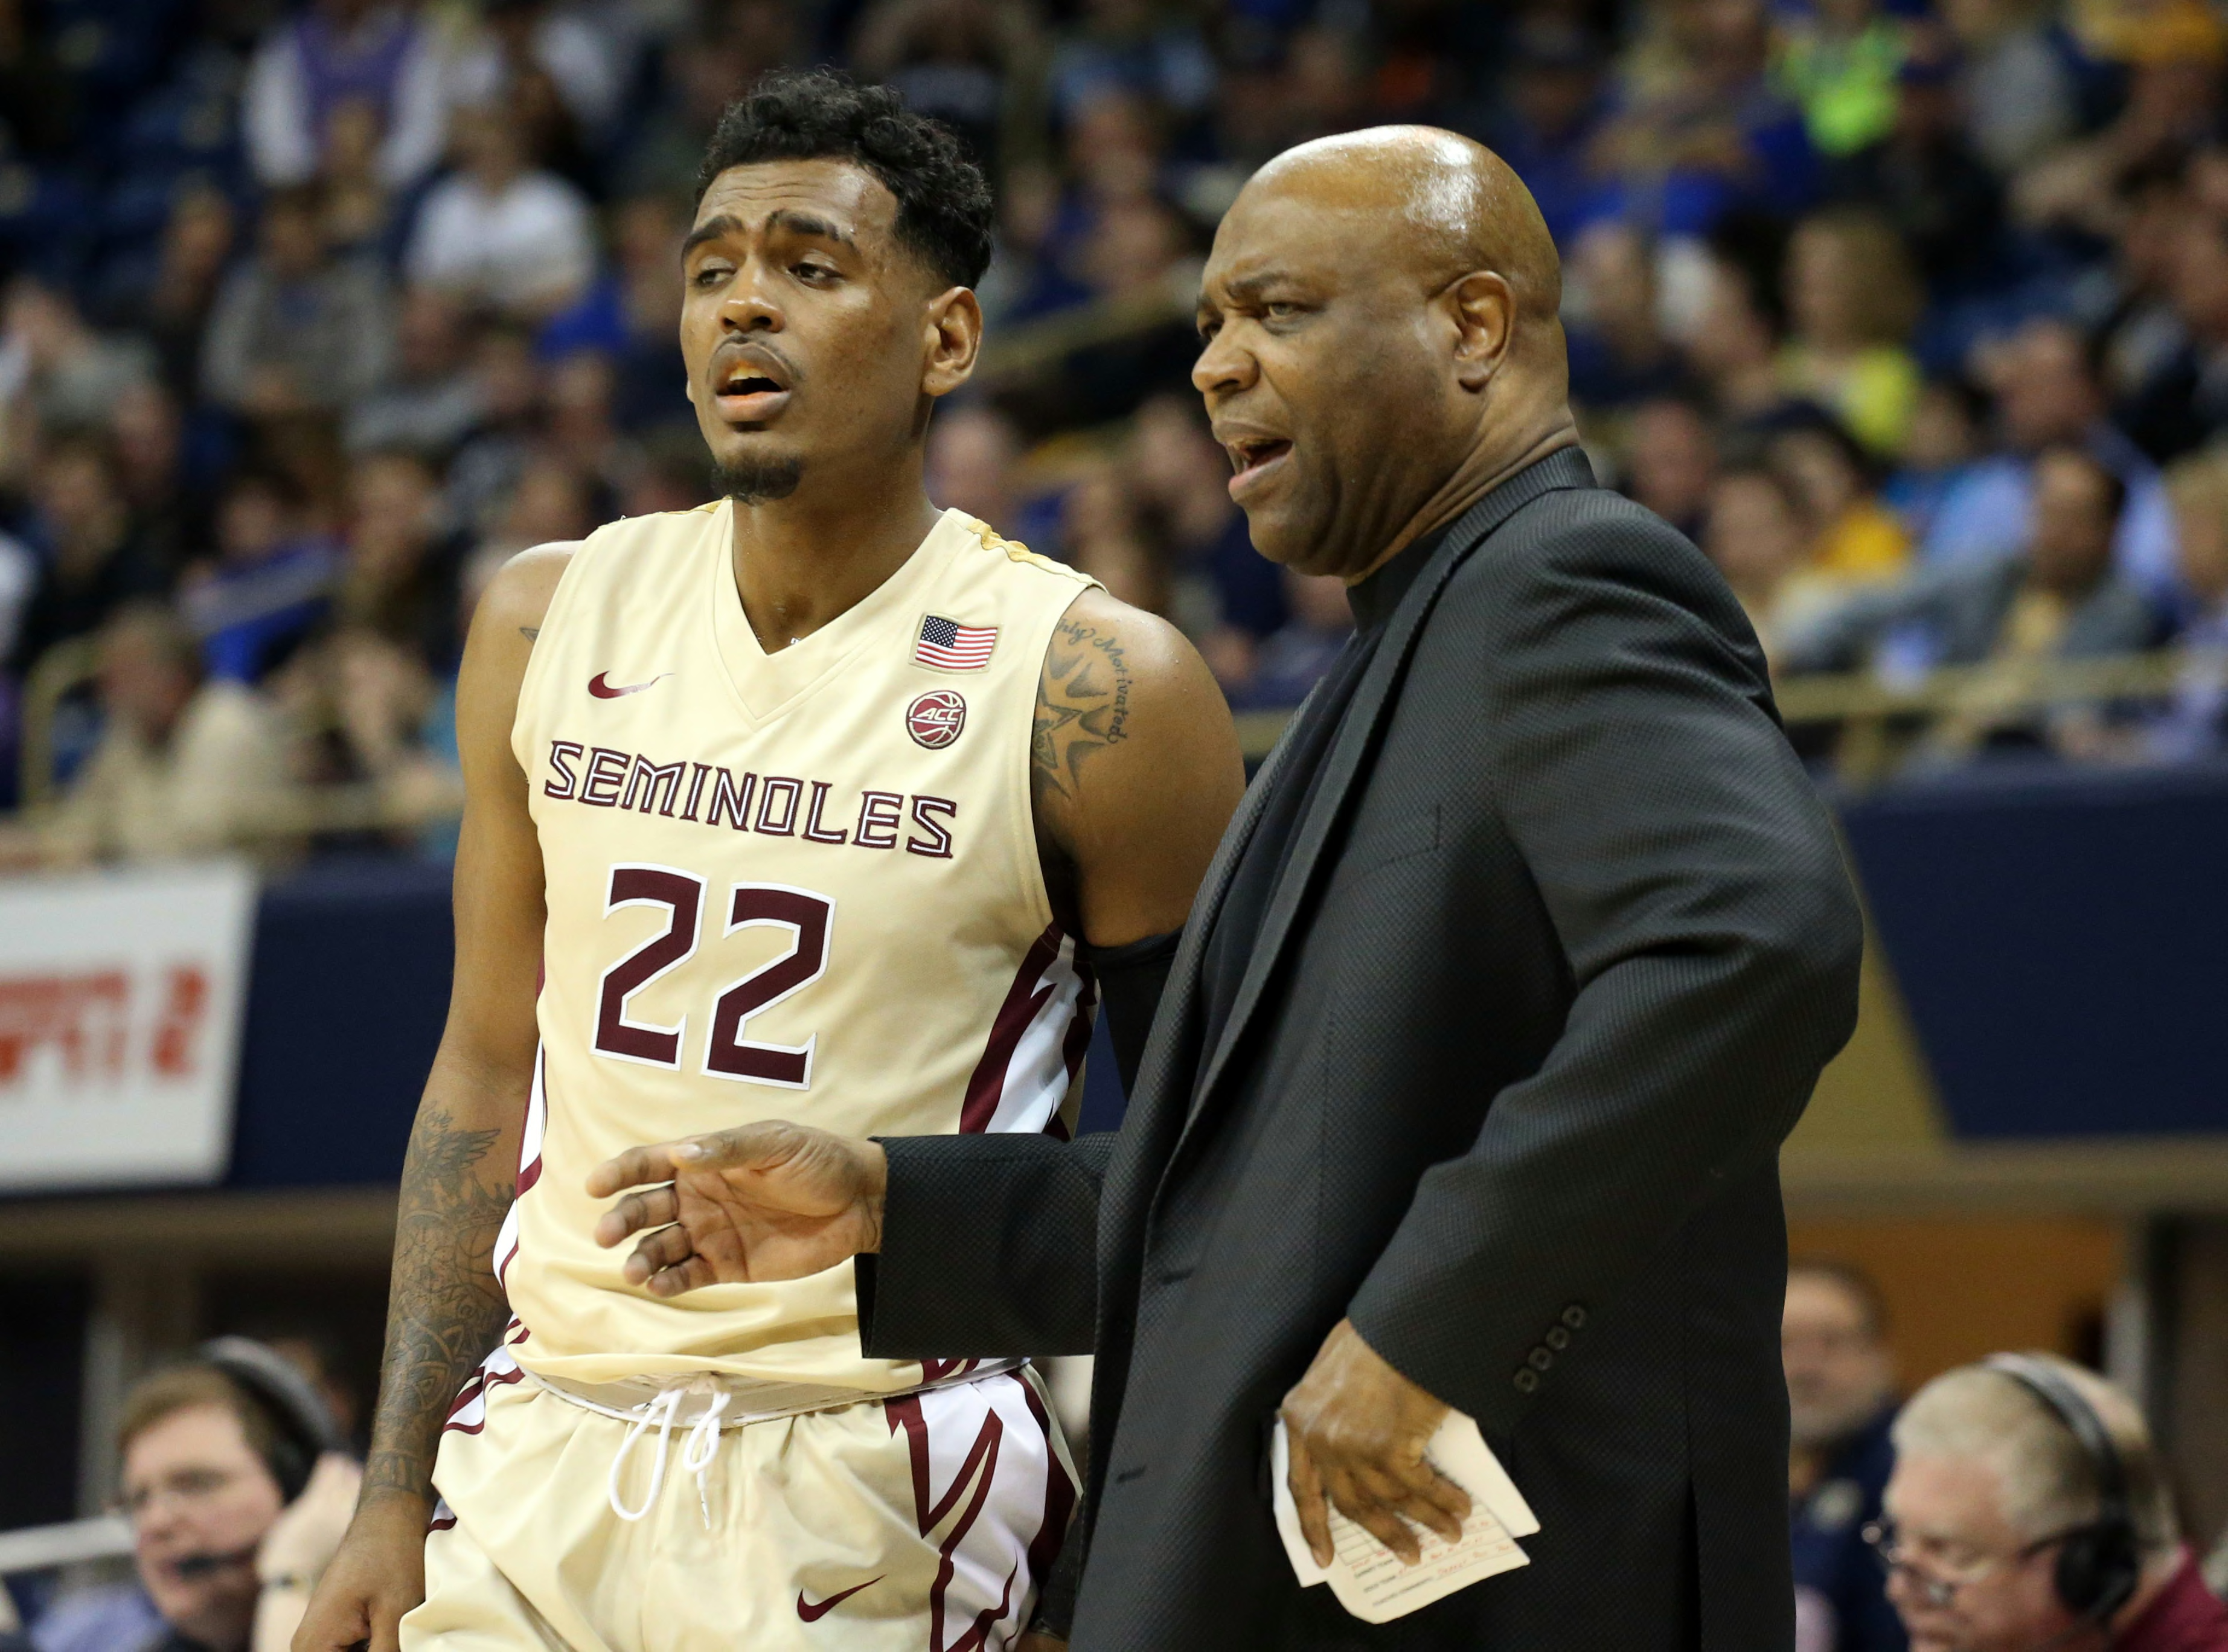 FSU Basketball: 'Noles Tied For Lead With 6 Wins Over Top 25 Teams